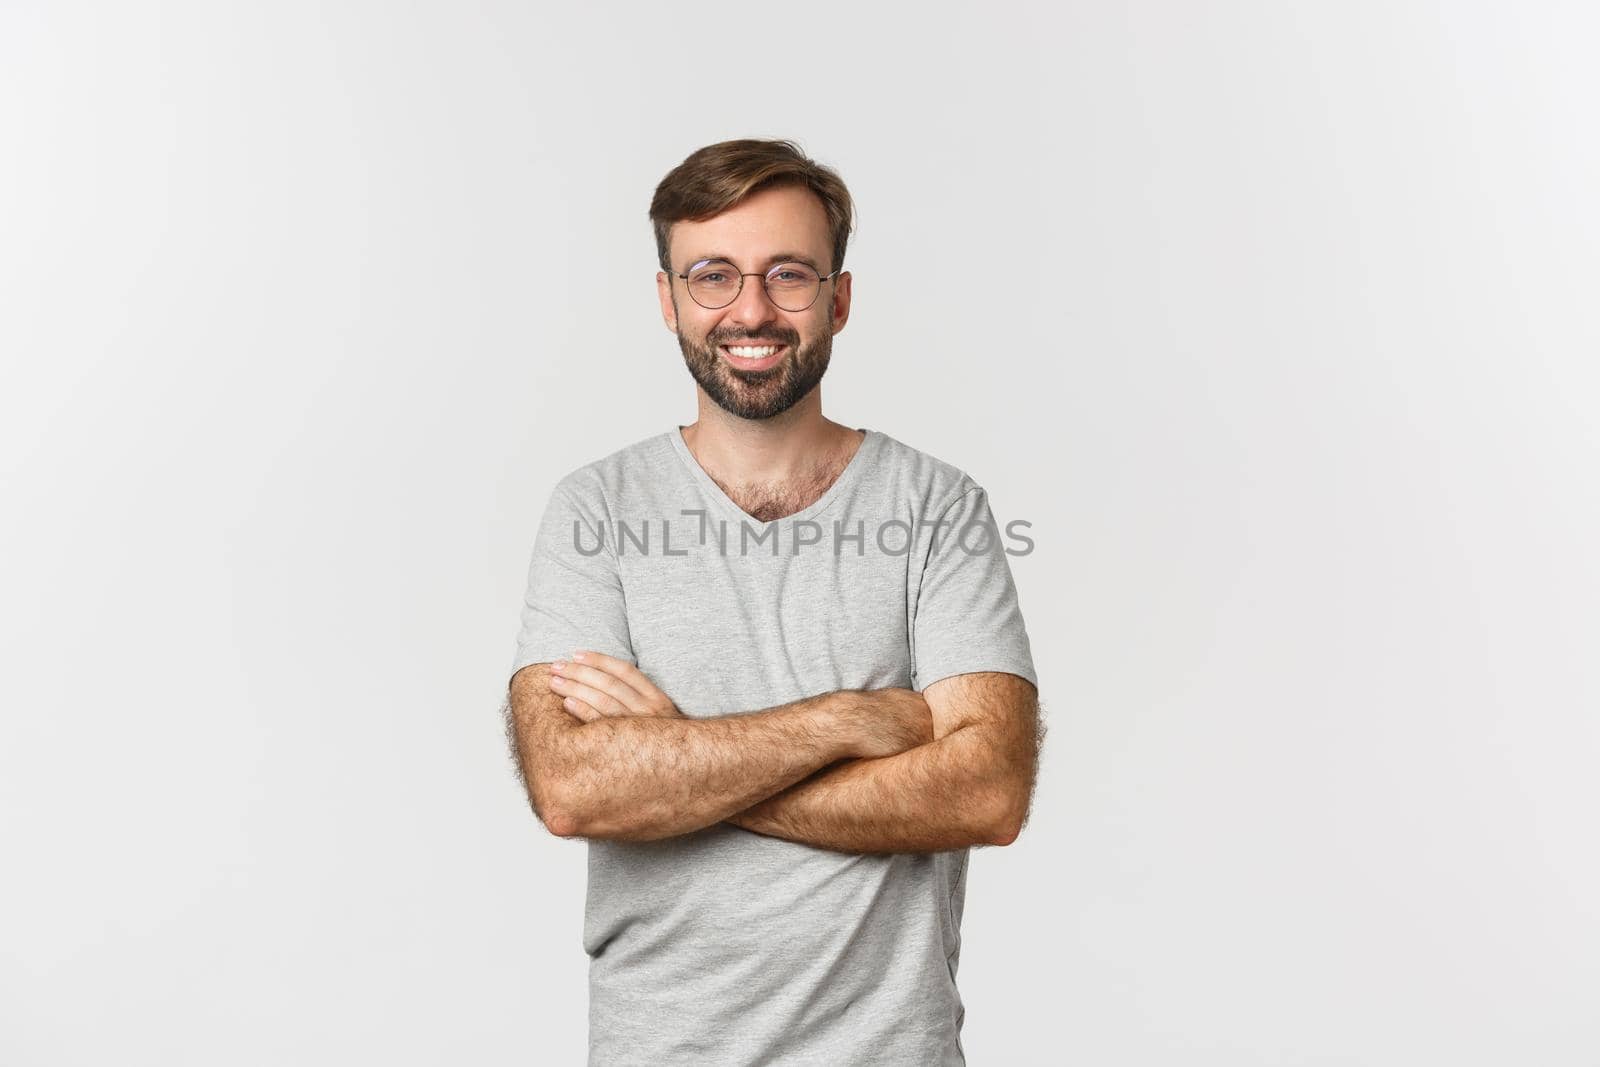 Image of confident handsome man in gray t-shirt and glasses, cross arms on chest and smiling, standing over white background.